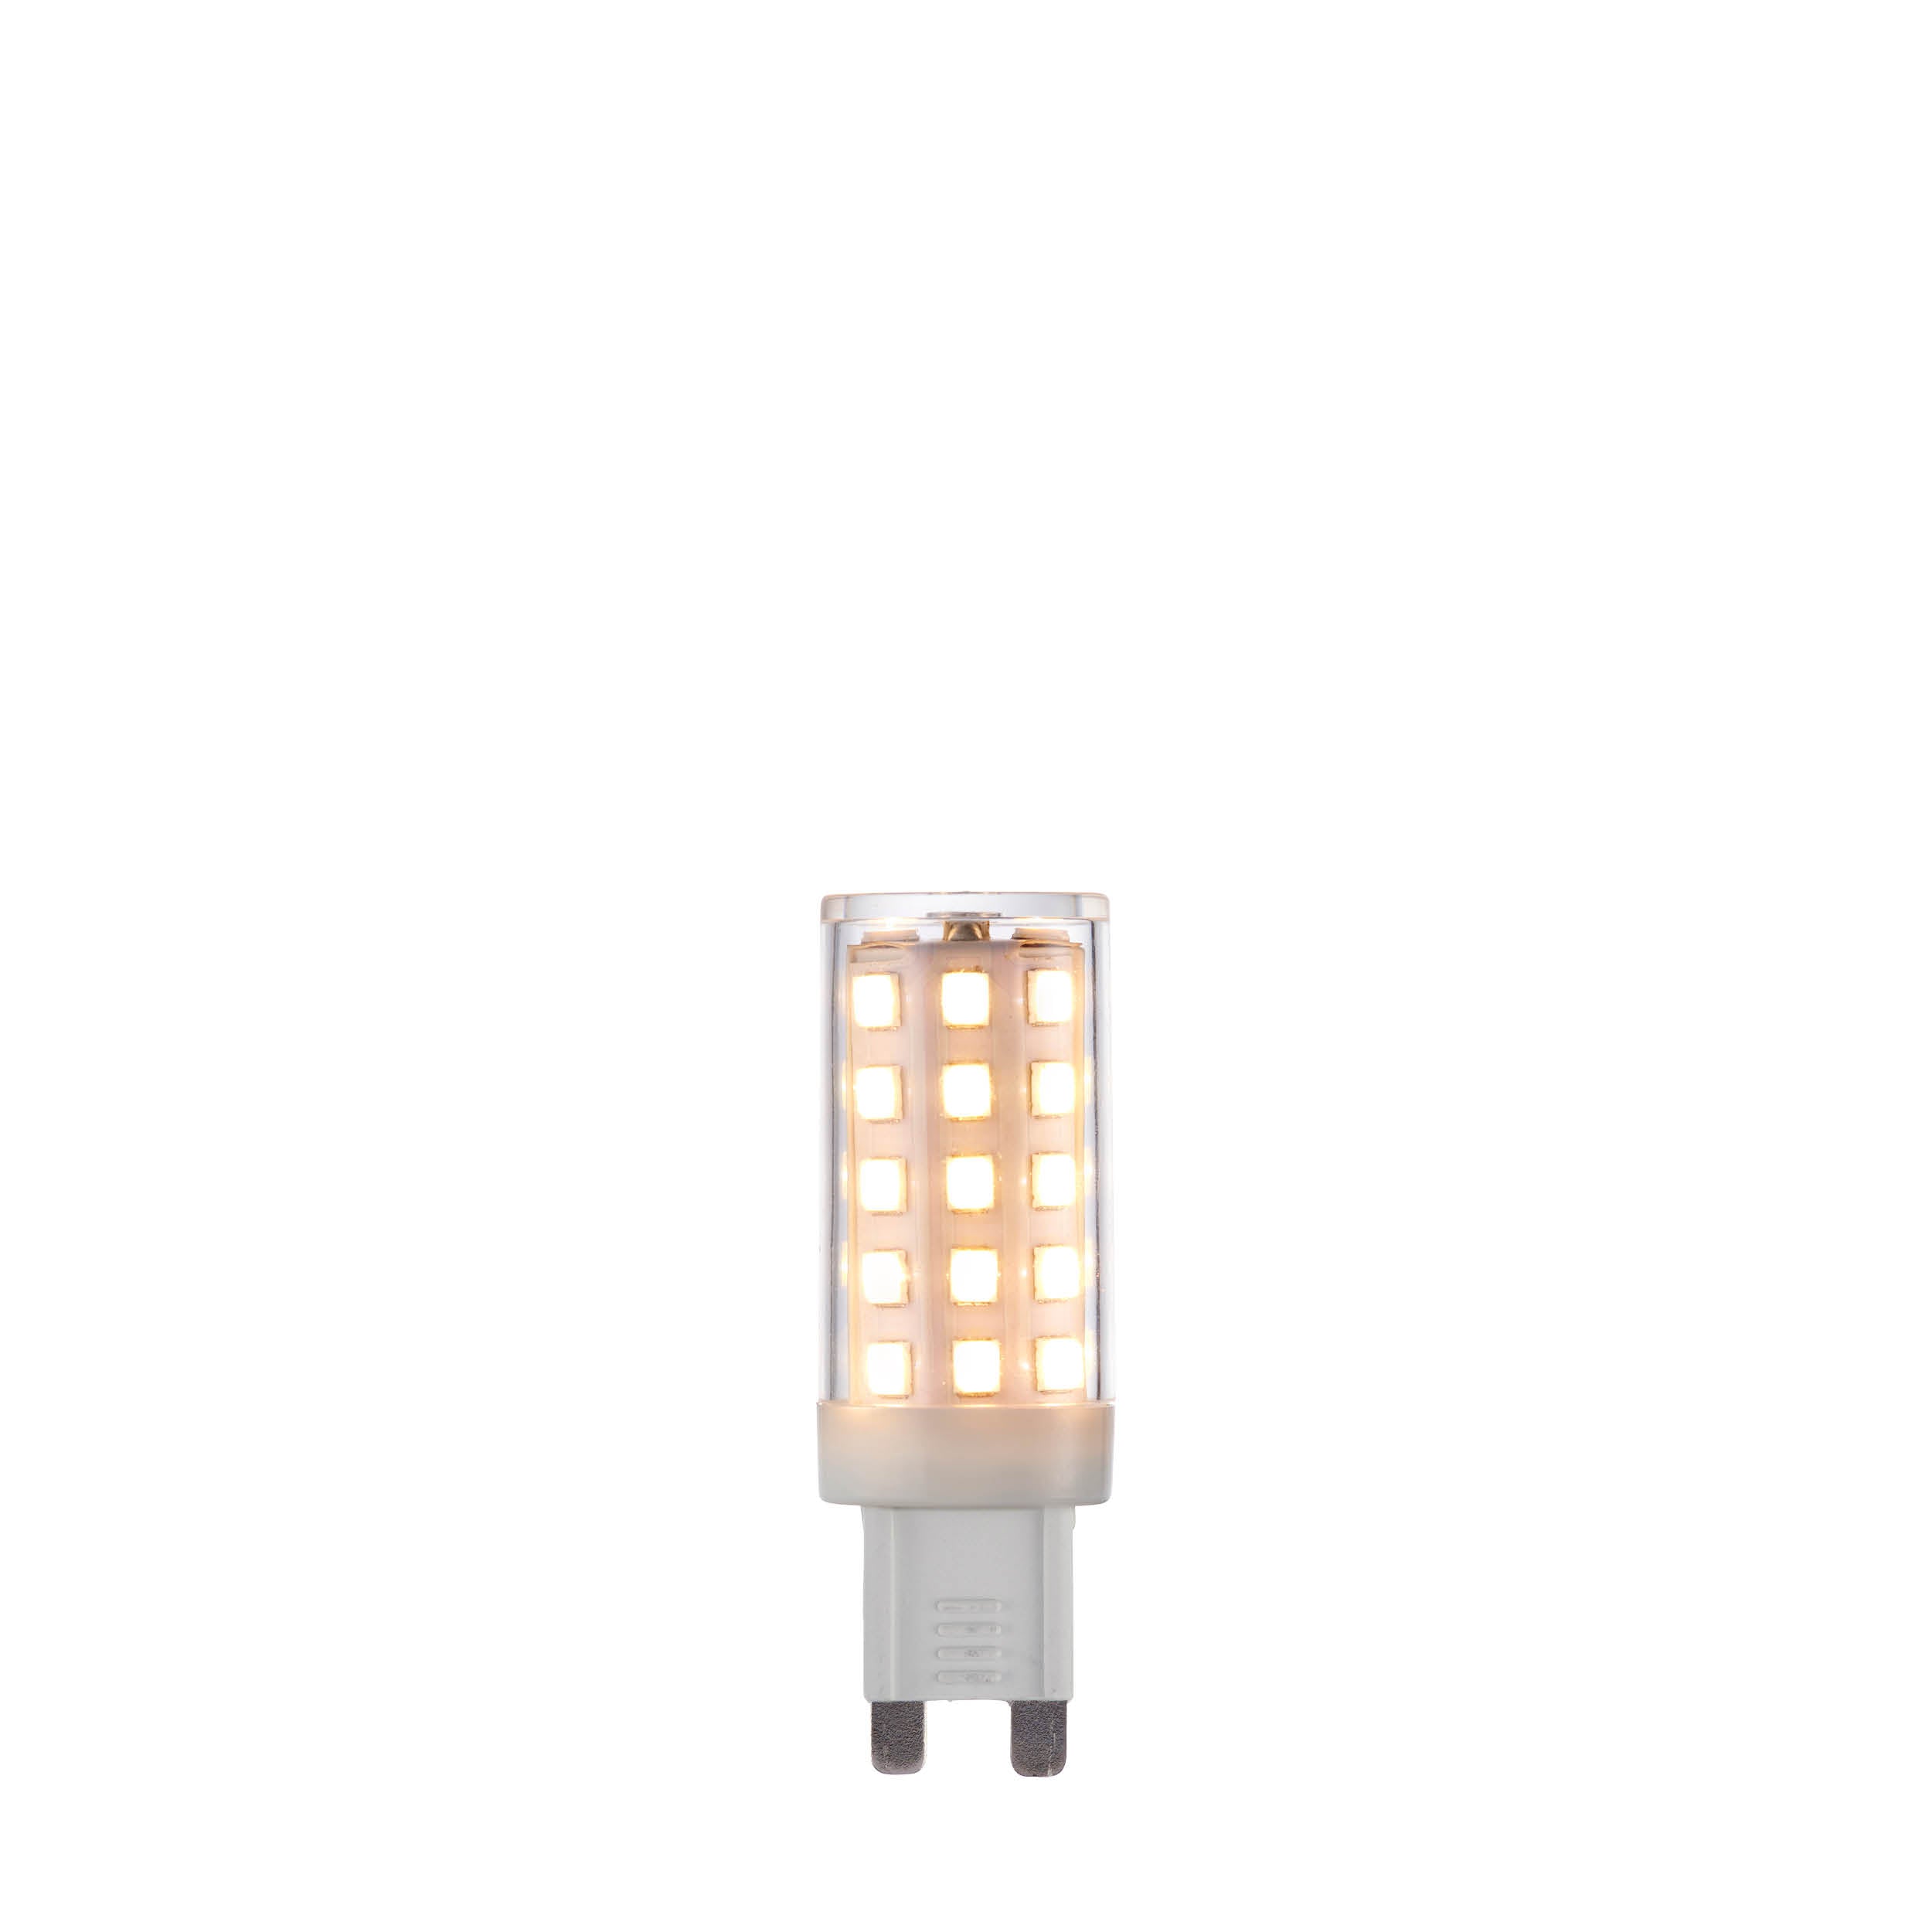 G9 LED bulb capsule. Warm White 3000K 4.8W 470lm. Dimmable